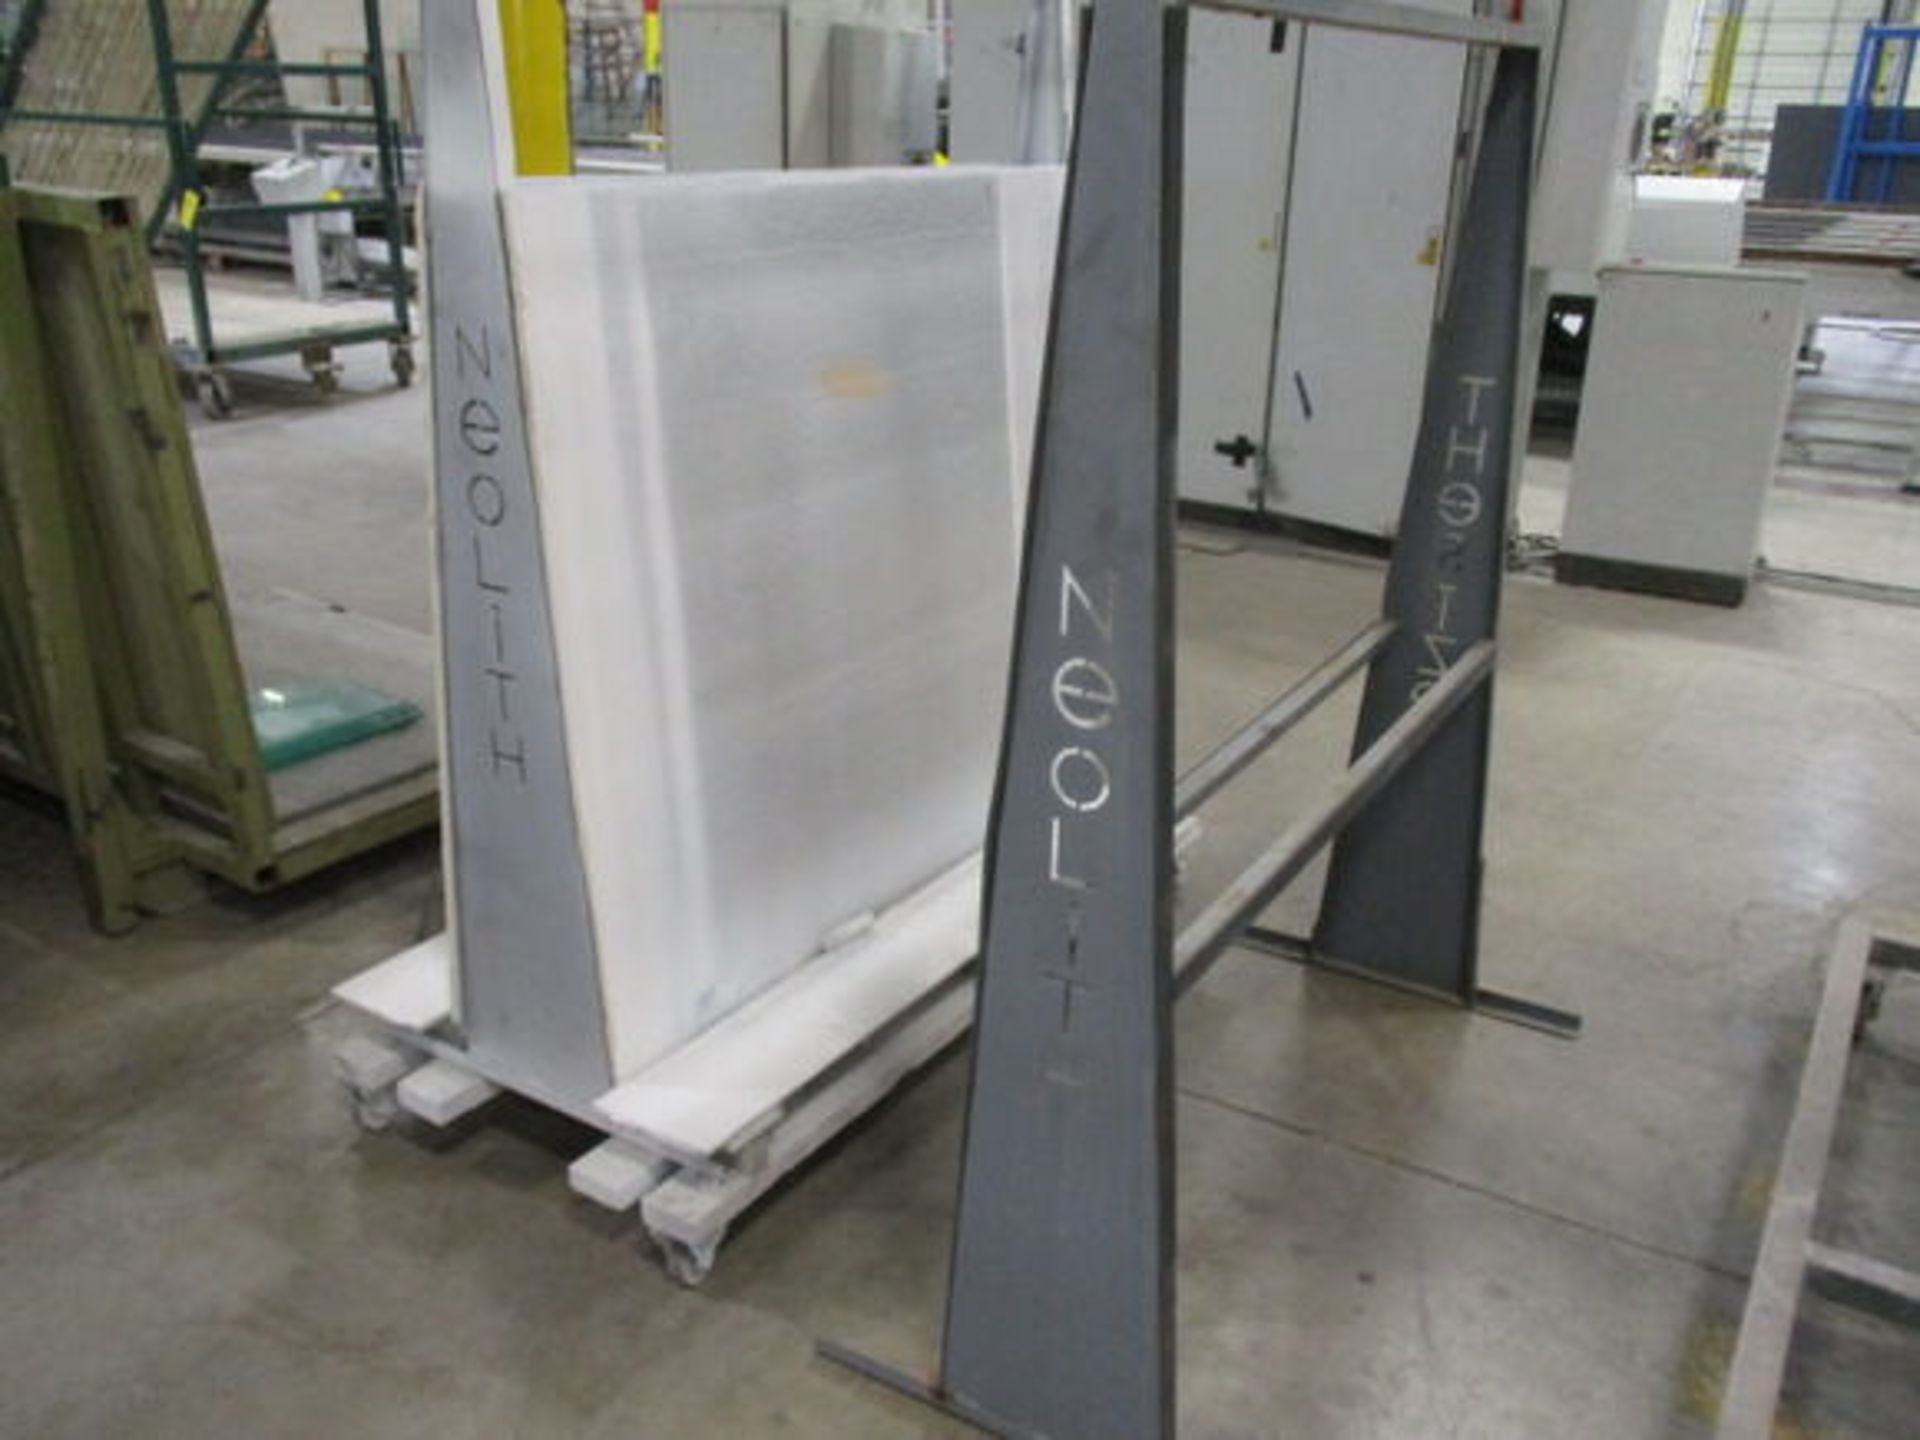 (2) NEOLITH DOUBLE SIDED GLASS RACKS, APPROX 3' X 6' X 6'